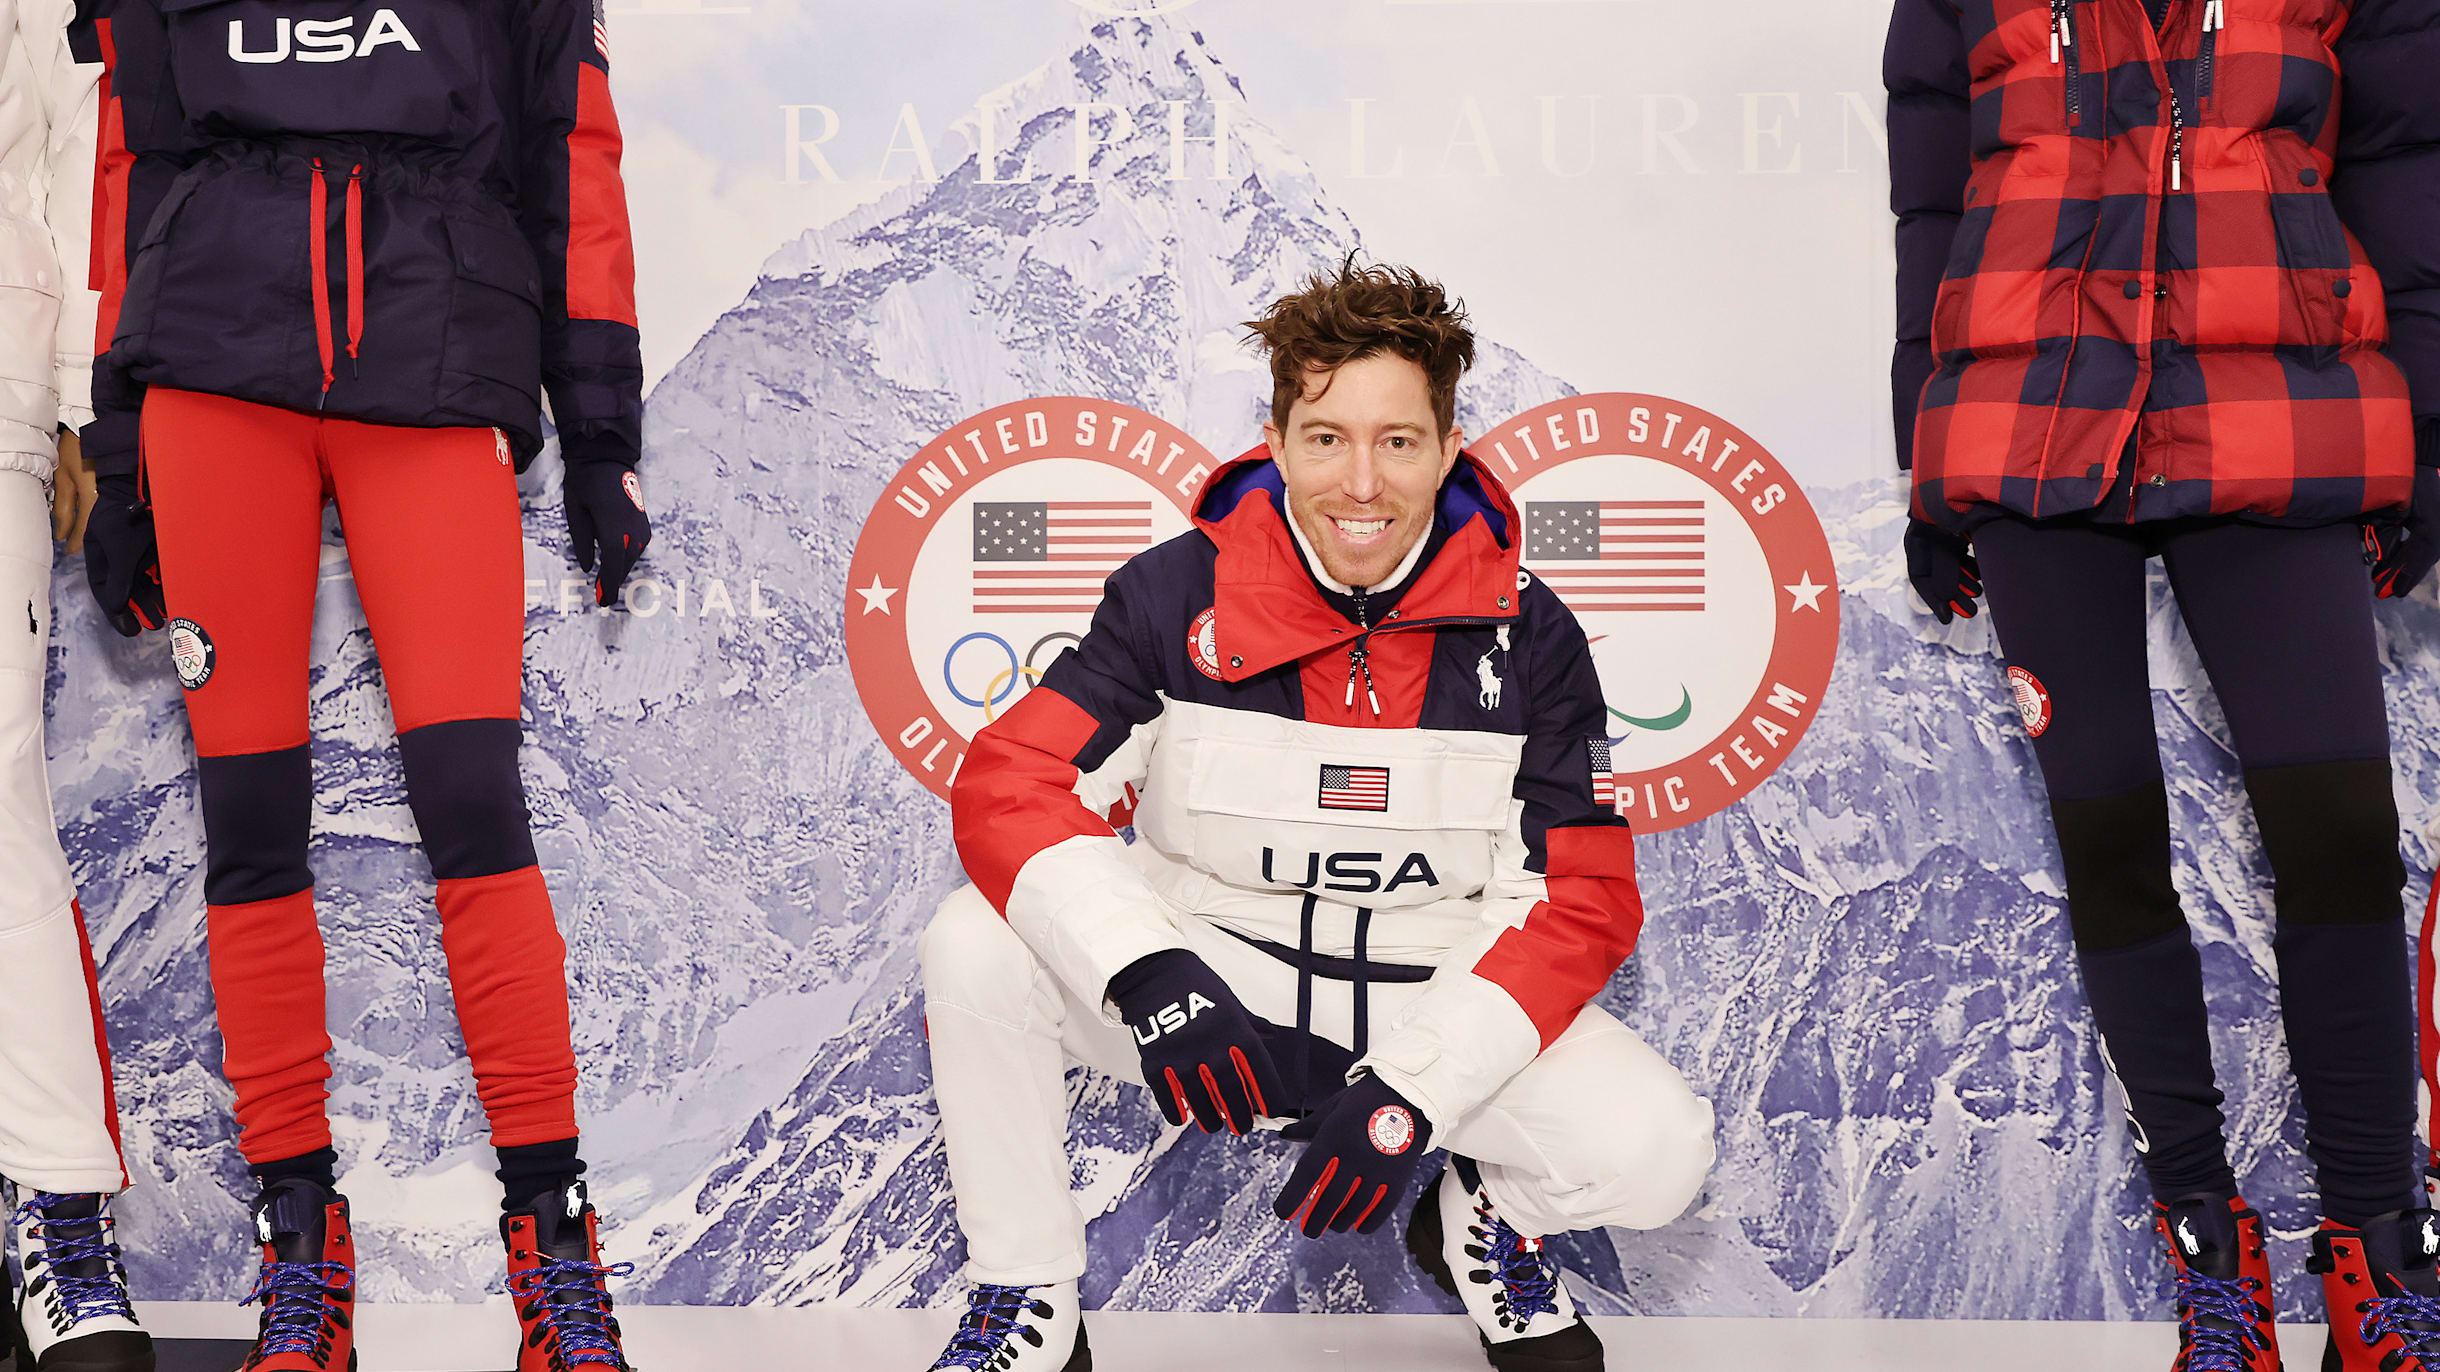 Despite His Humble Beginnings, Shaun White Now Worth 65 Million Dollars  Lays Bare the Details of His Collaboration With Fashion Giant Louis Vuitton  - EssentiallySports